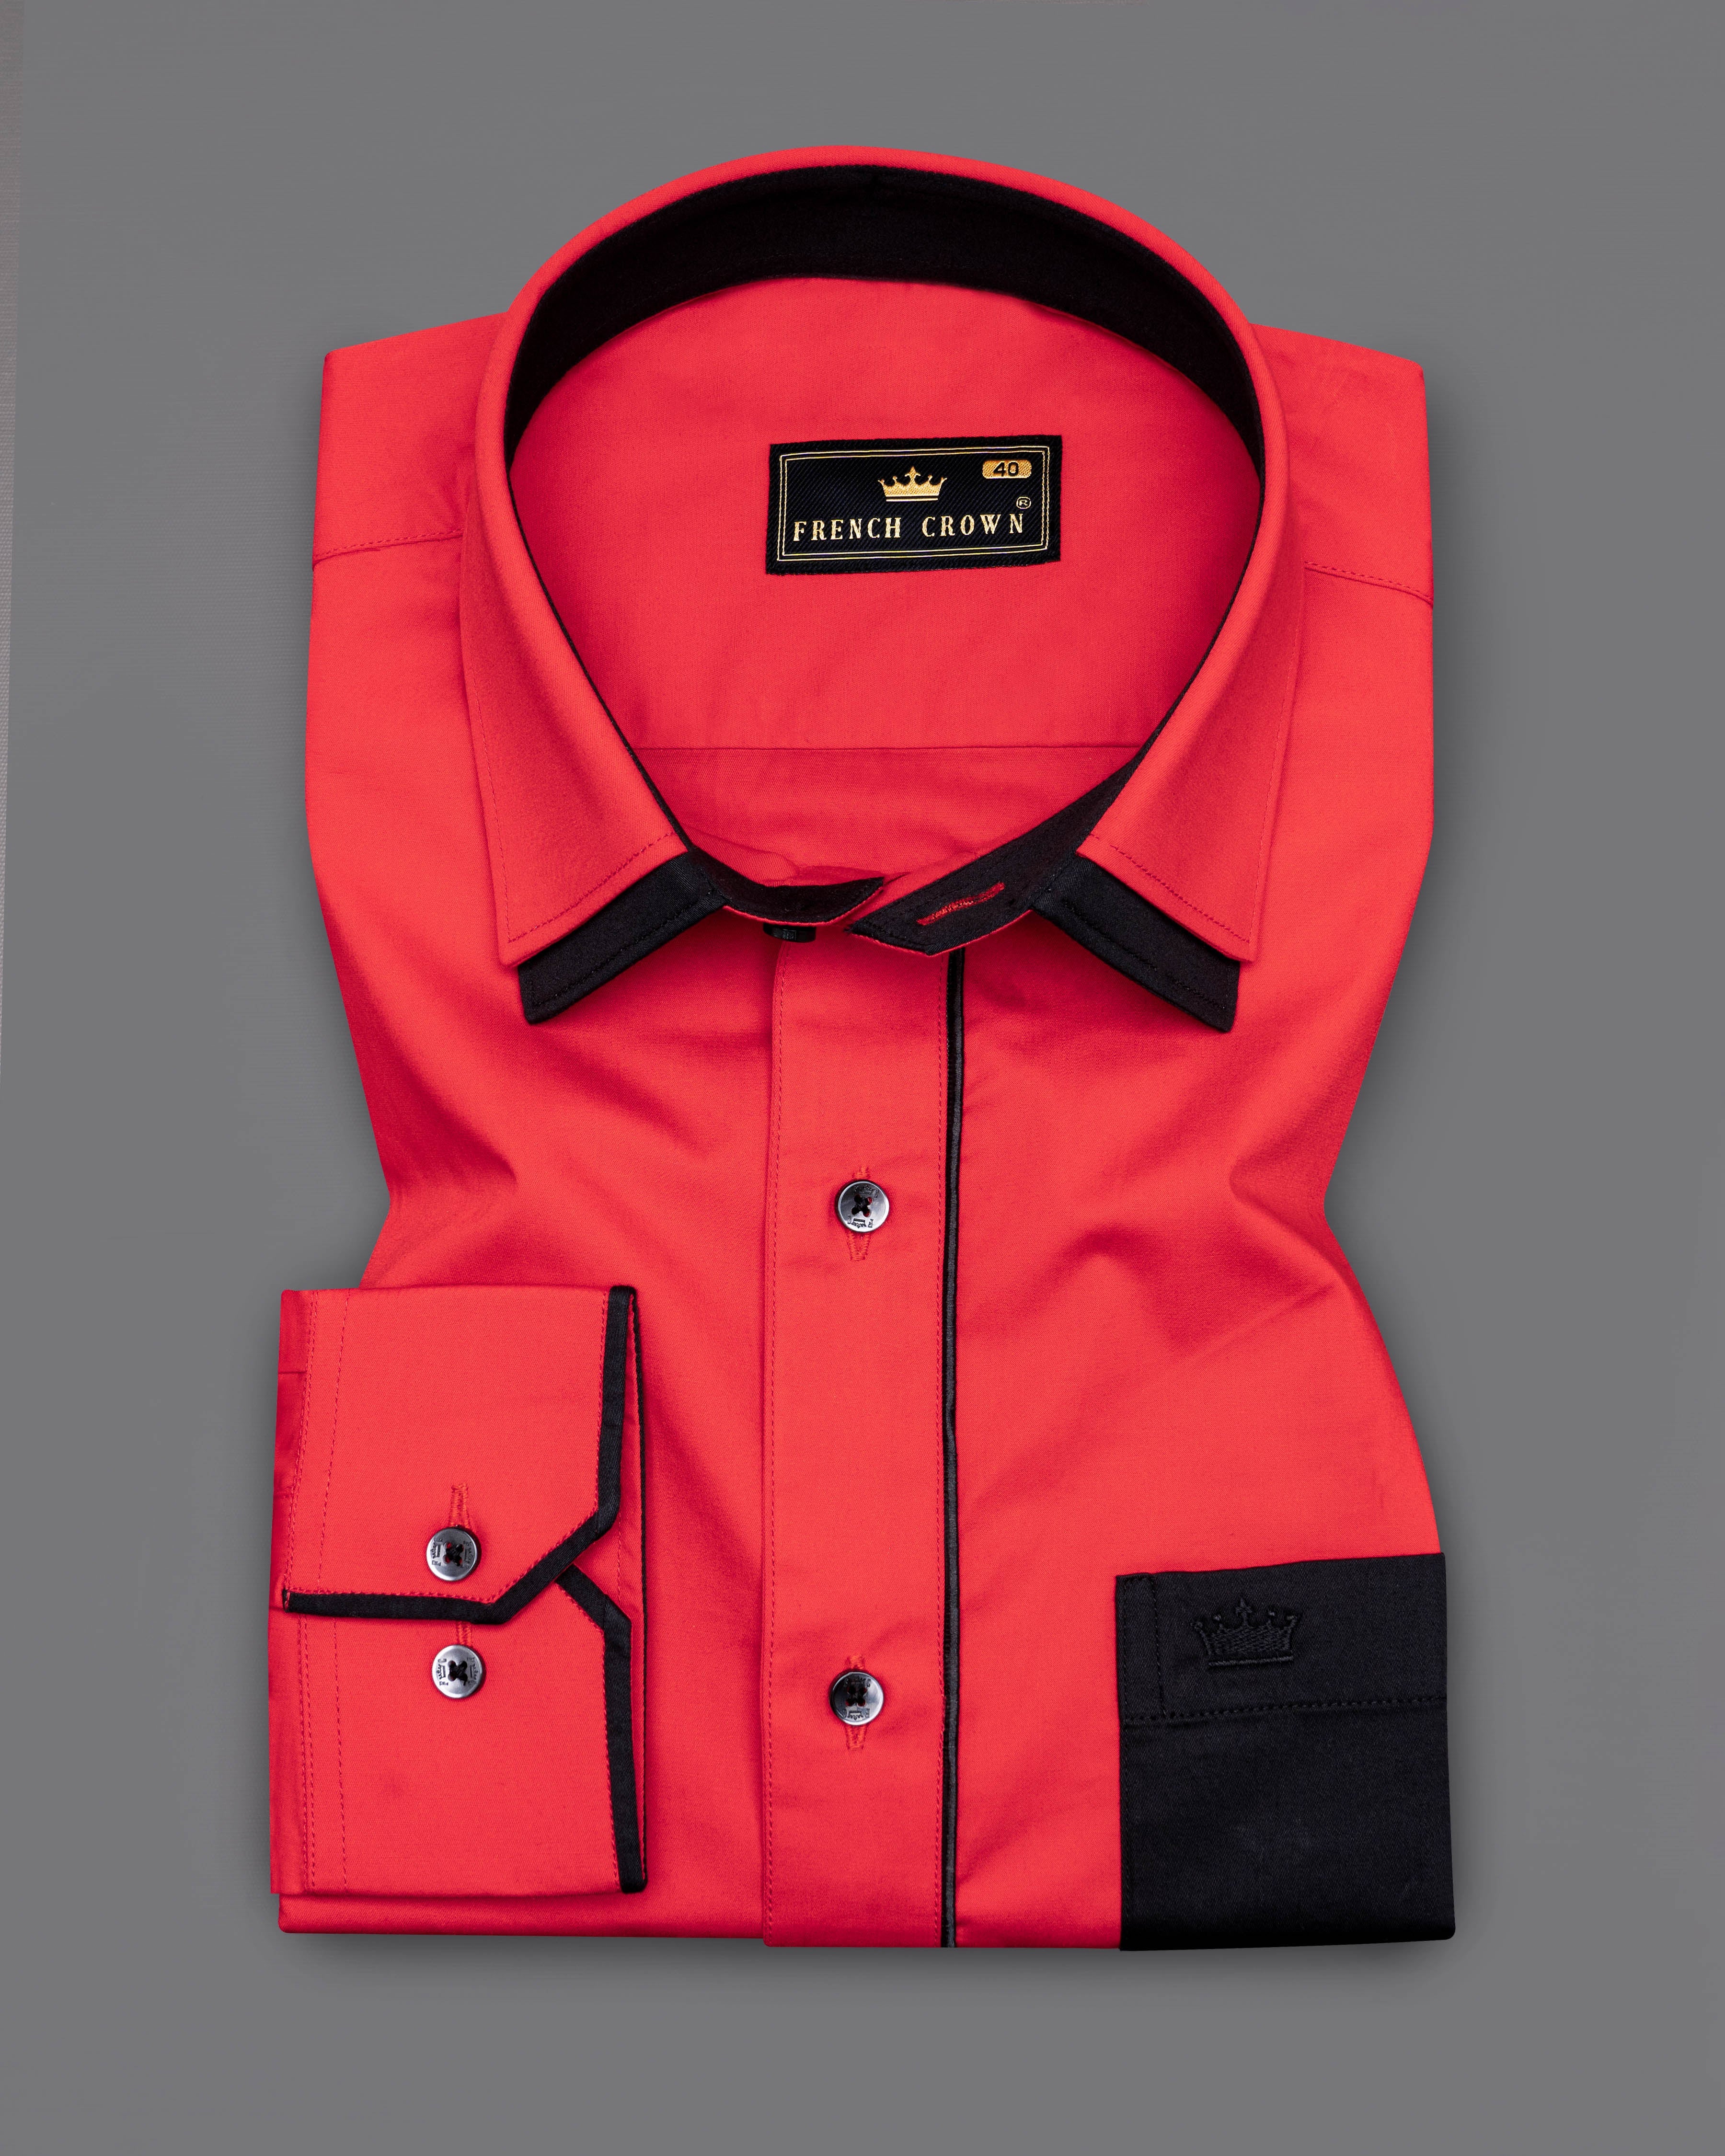 Carmine Red with Black Piping Work Premium Cotton Designer Shirt 9495-CP-BLK-P454-38, 9495-CP-BLK-P454-H-38, 9495-CP-BLK-P454-39, 9495-CP-BLK-P454-H-39, 9495-CP-BLK-P454-40, 9495-CP-BLK-P454-H-40, 9495-CP-BLK-P454-42, 9495-CP-BLK-P454-H-42, 9495-CP-BLK-P454-44, 9495-CP-BLK-P454-H-44, 9495-CP-BLK-P454-46, 9495-CP-BLK-P454-H-46, 9495-CP-BLK-P454-48, 9495-CP-BLK-P454-H-48, 9495-CP-BLK-P454-50, 9495-CP-BLK-P454-H-50, 9495-CP-BLK-P454-52, 9495-CP-BLK-P454-H-52